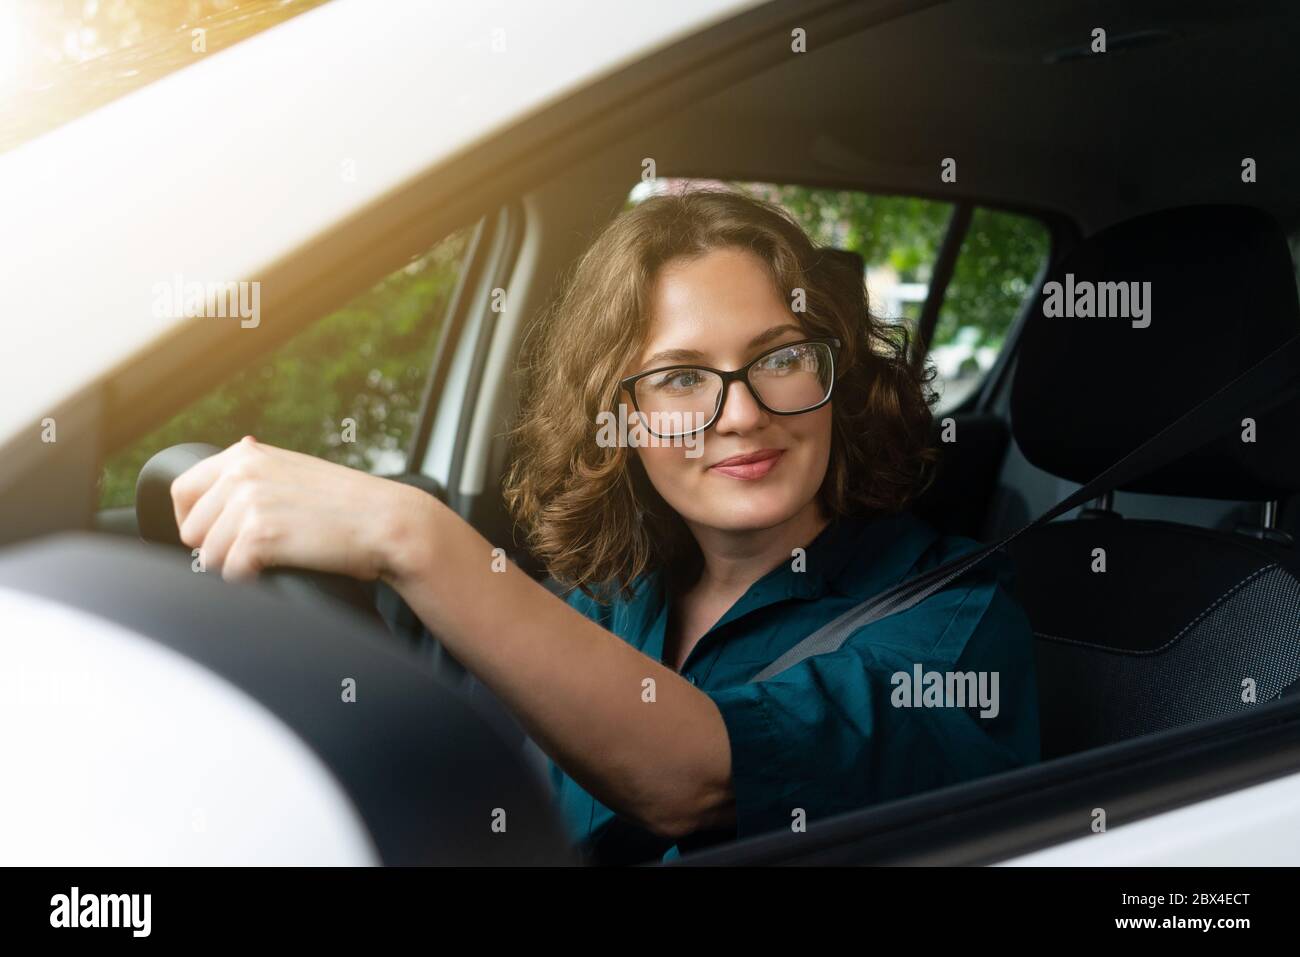 Woman driver driving a car Stock Photo